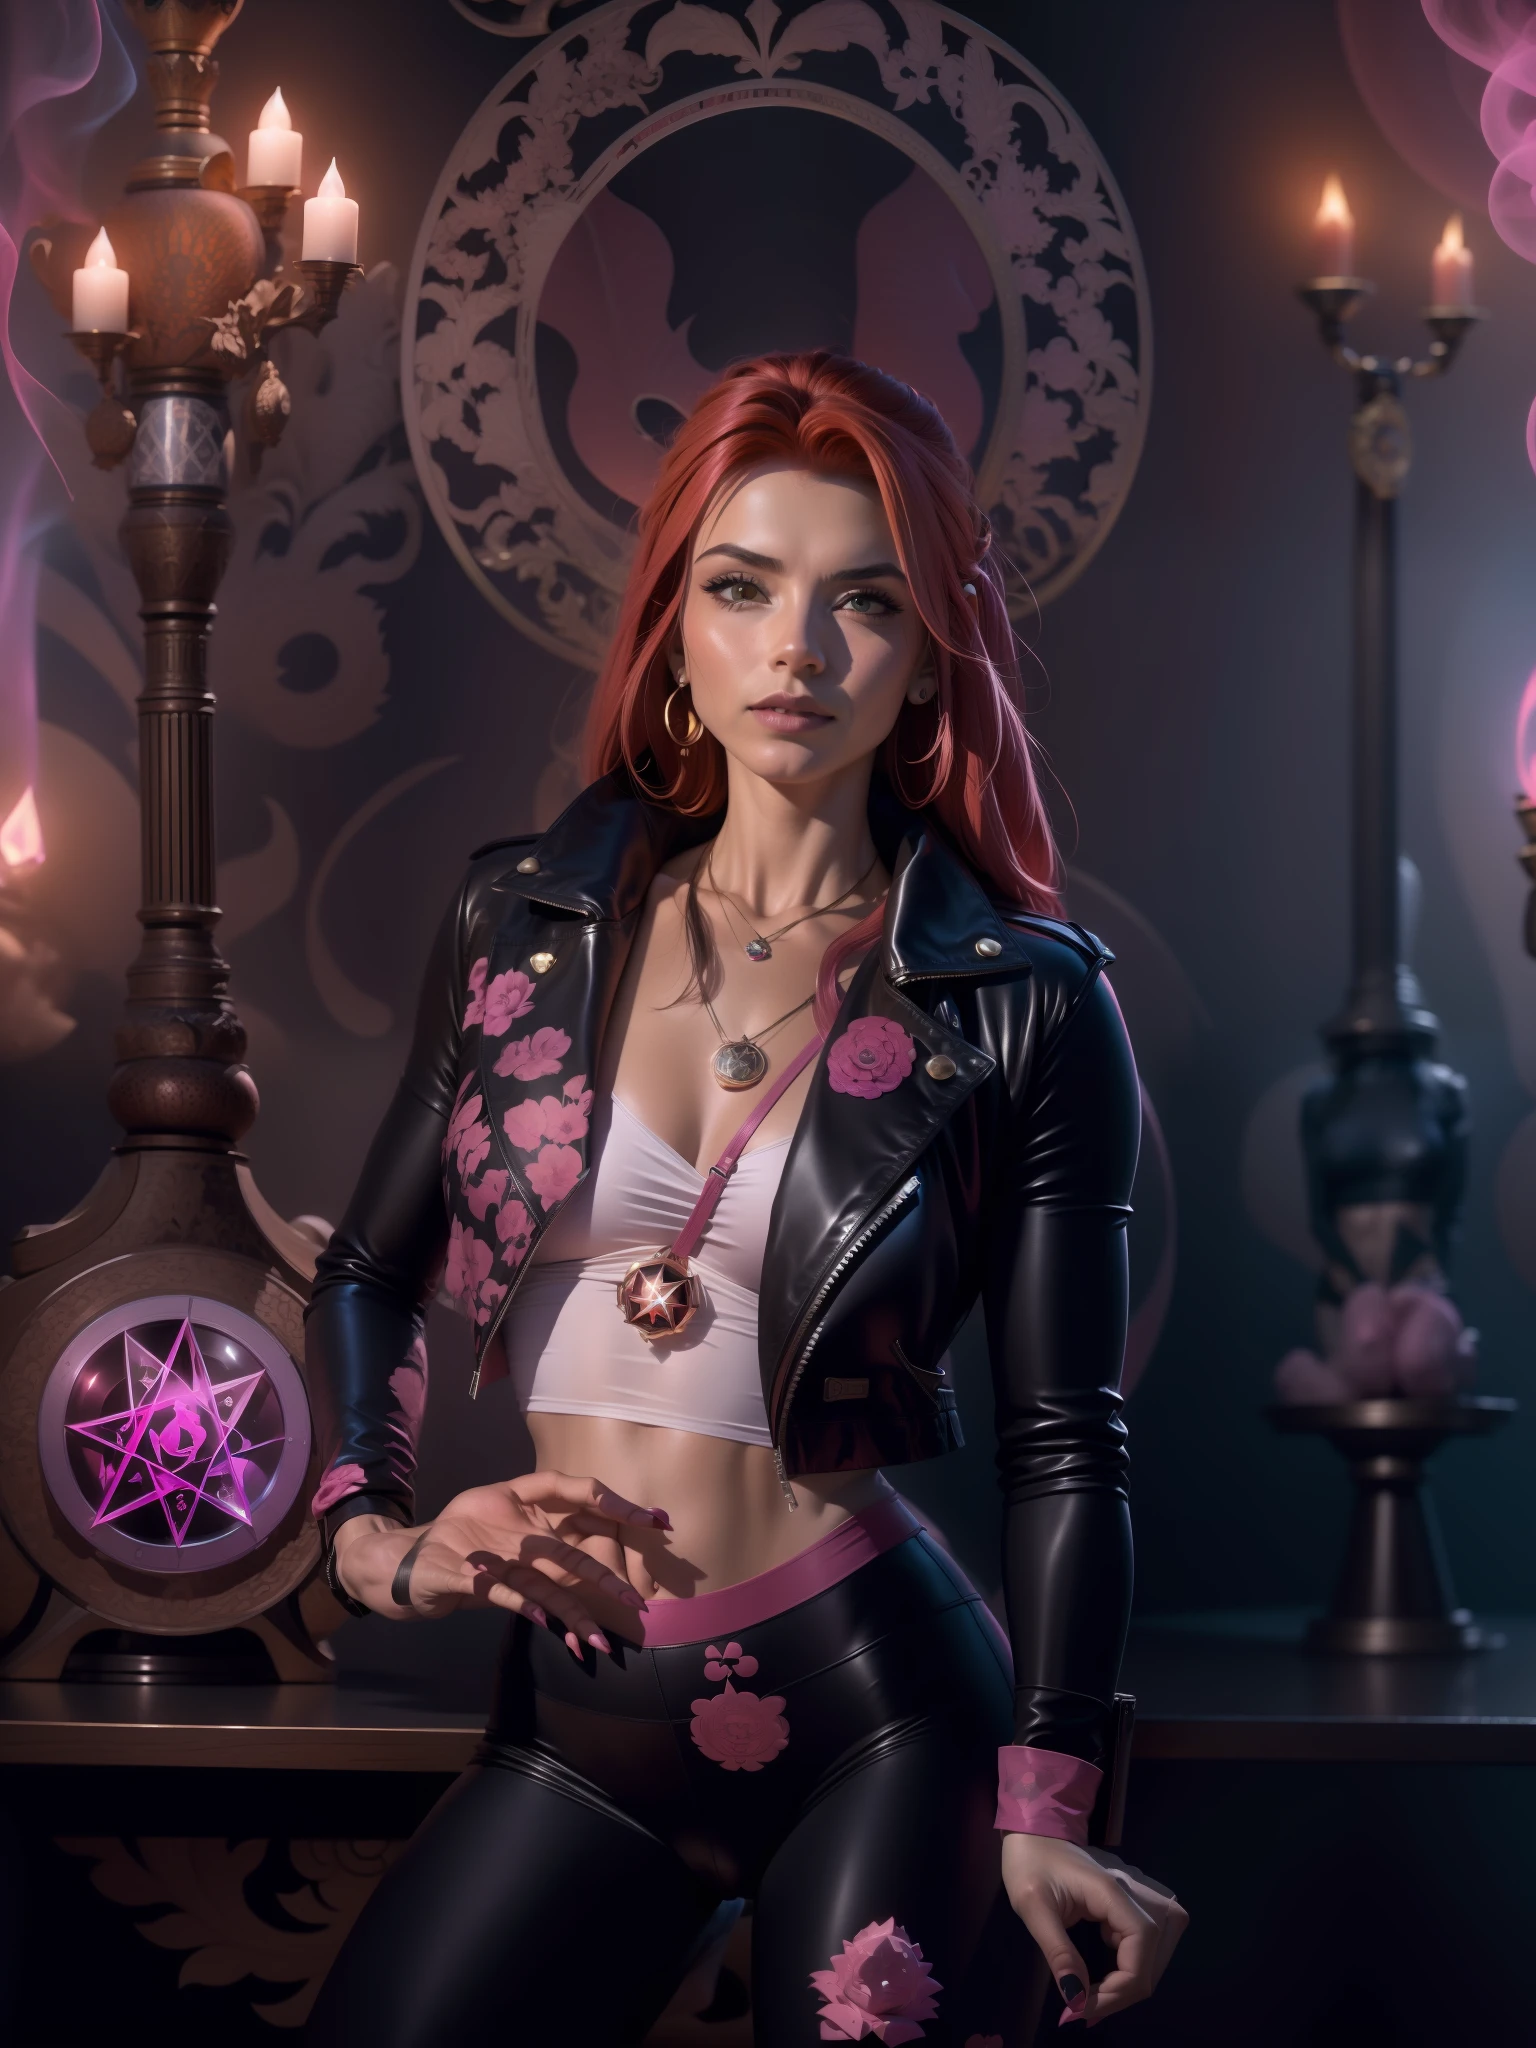 a sexy red-haired witch wearing a modern leather jacket and pink yoga pants, adorned with many magical accessories, casting a red magic circle, with a background of pink smoke and many skulls, in a seductive pose.

black leather jacket, pink yoga pants, black boots, pentagram necklace, crystal earrings, dark background, sultry and mysterious expression, Canon EOS R5 camera, Fujifilm Fujicolor Pro 400H film, 50mm lens, high saturation, Tim Burton, David LaChapelle, Sofia Coppola, Gucci, Alexander McQueen